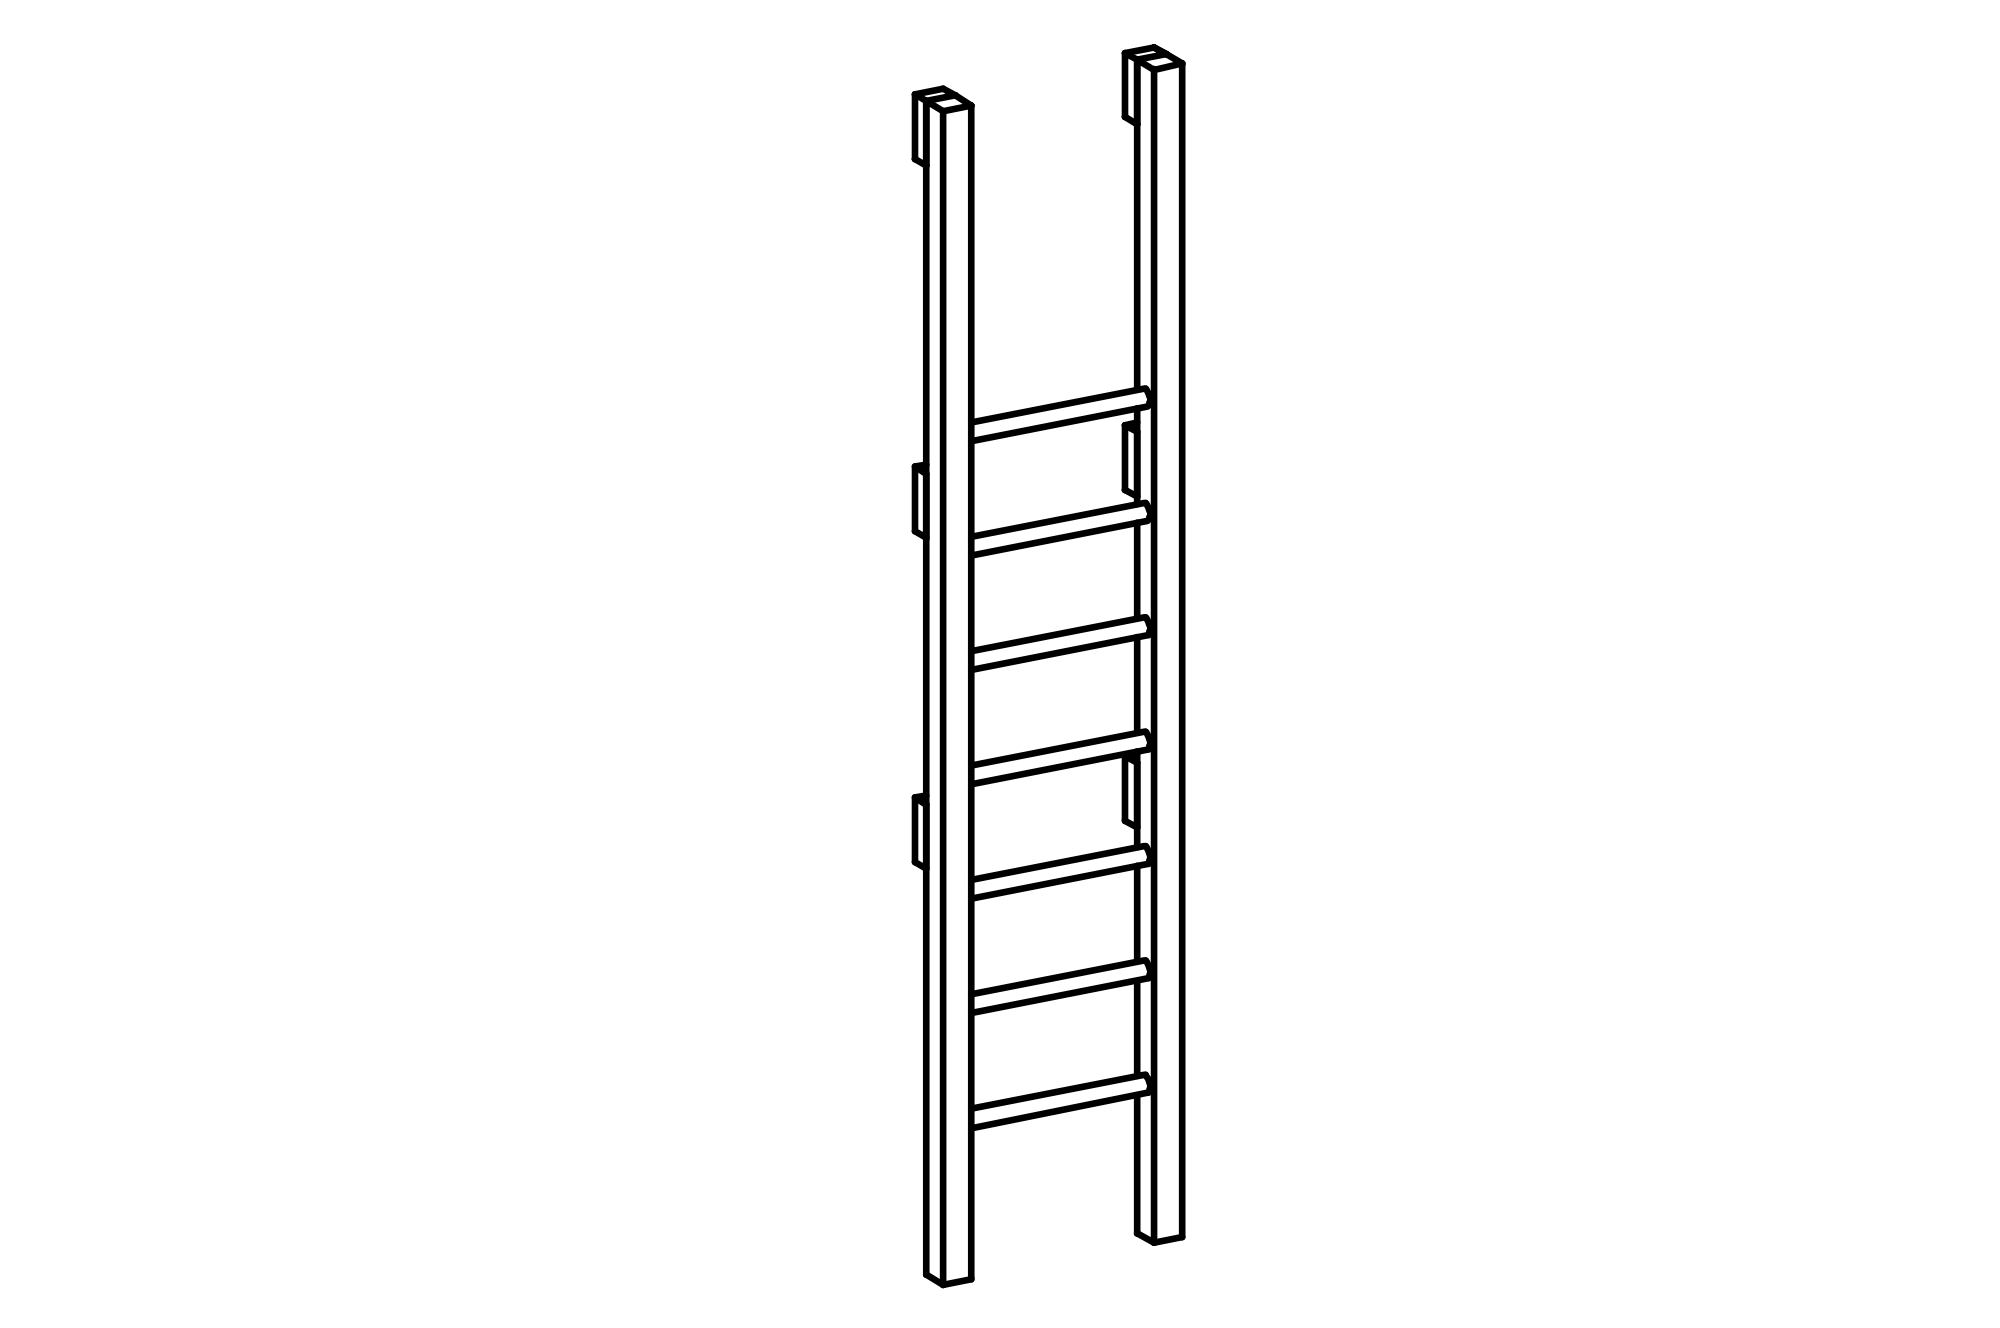 Ladder for Platforms, attachment to short side, height = 2 m with core-free sawn-timbers